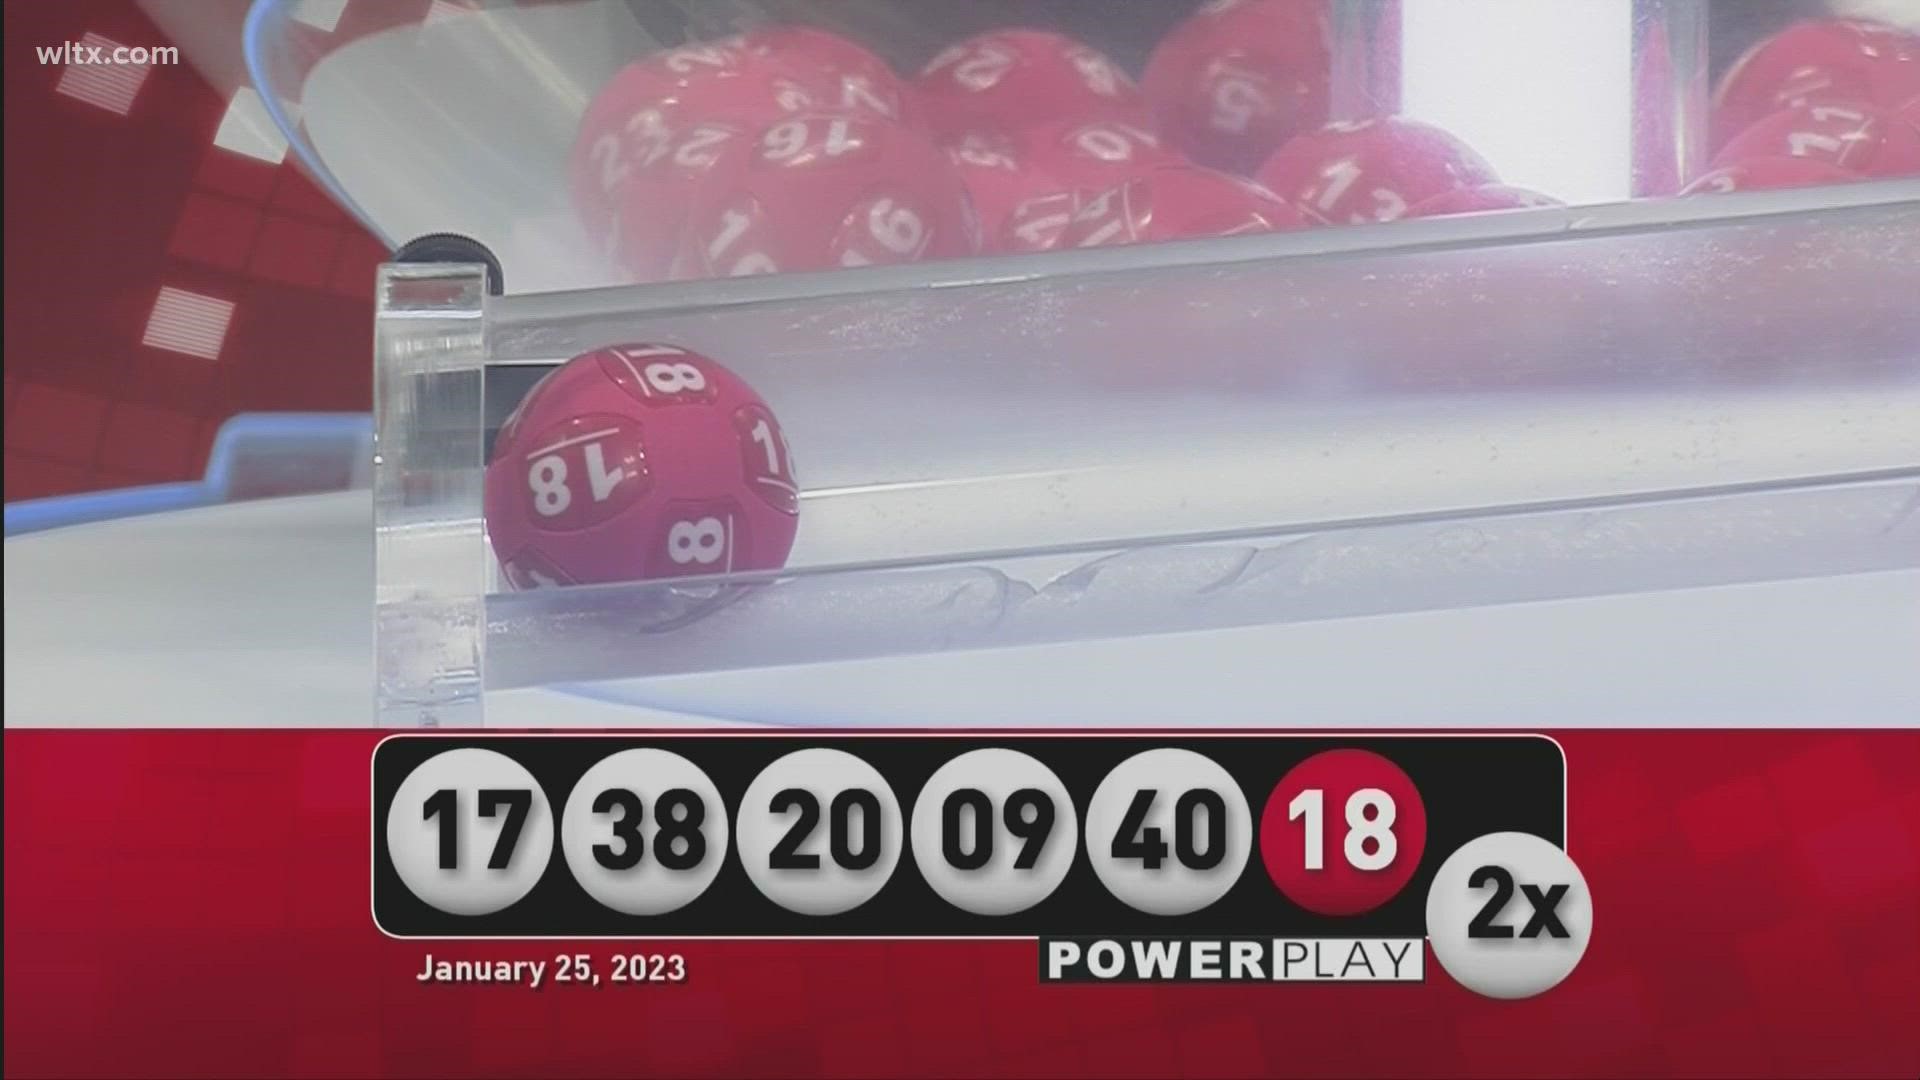 Here are the winning Powerball numbers for January 25, 2023